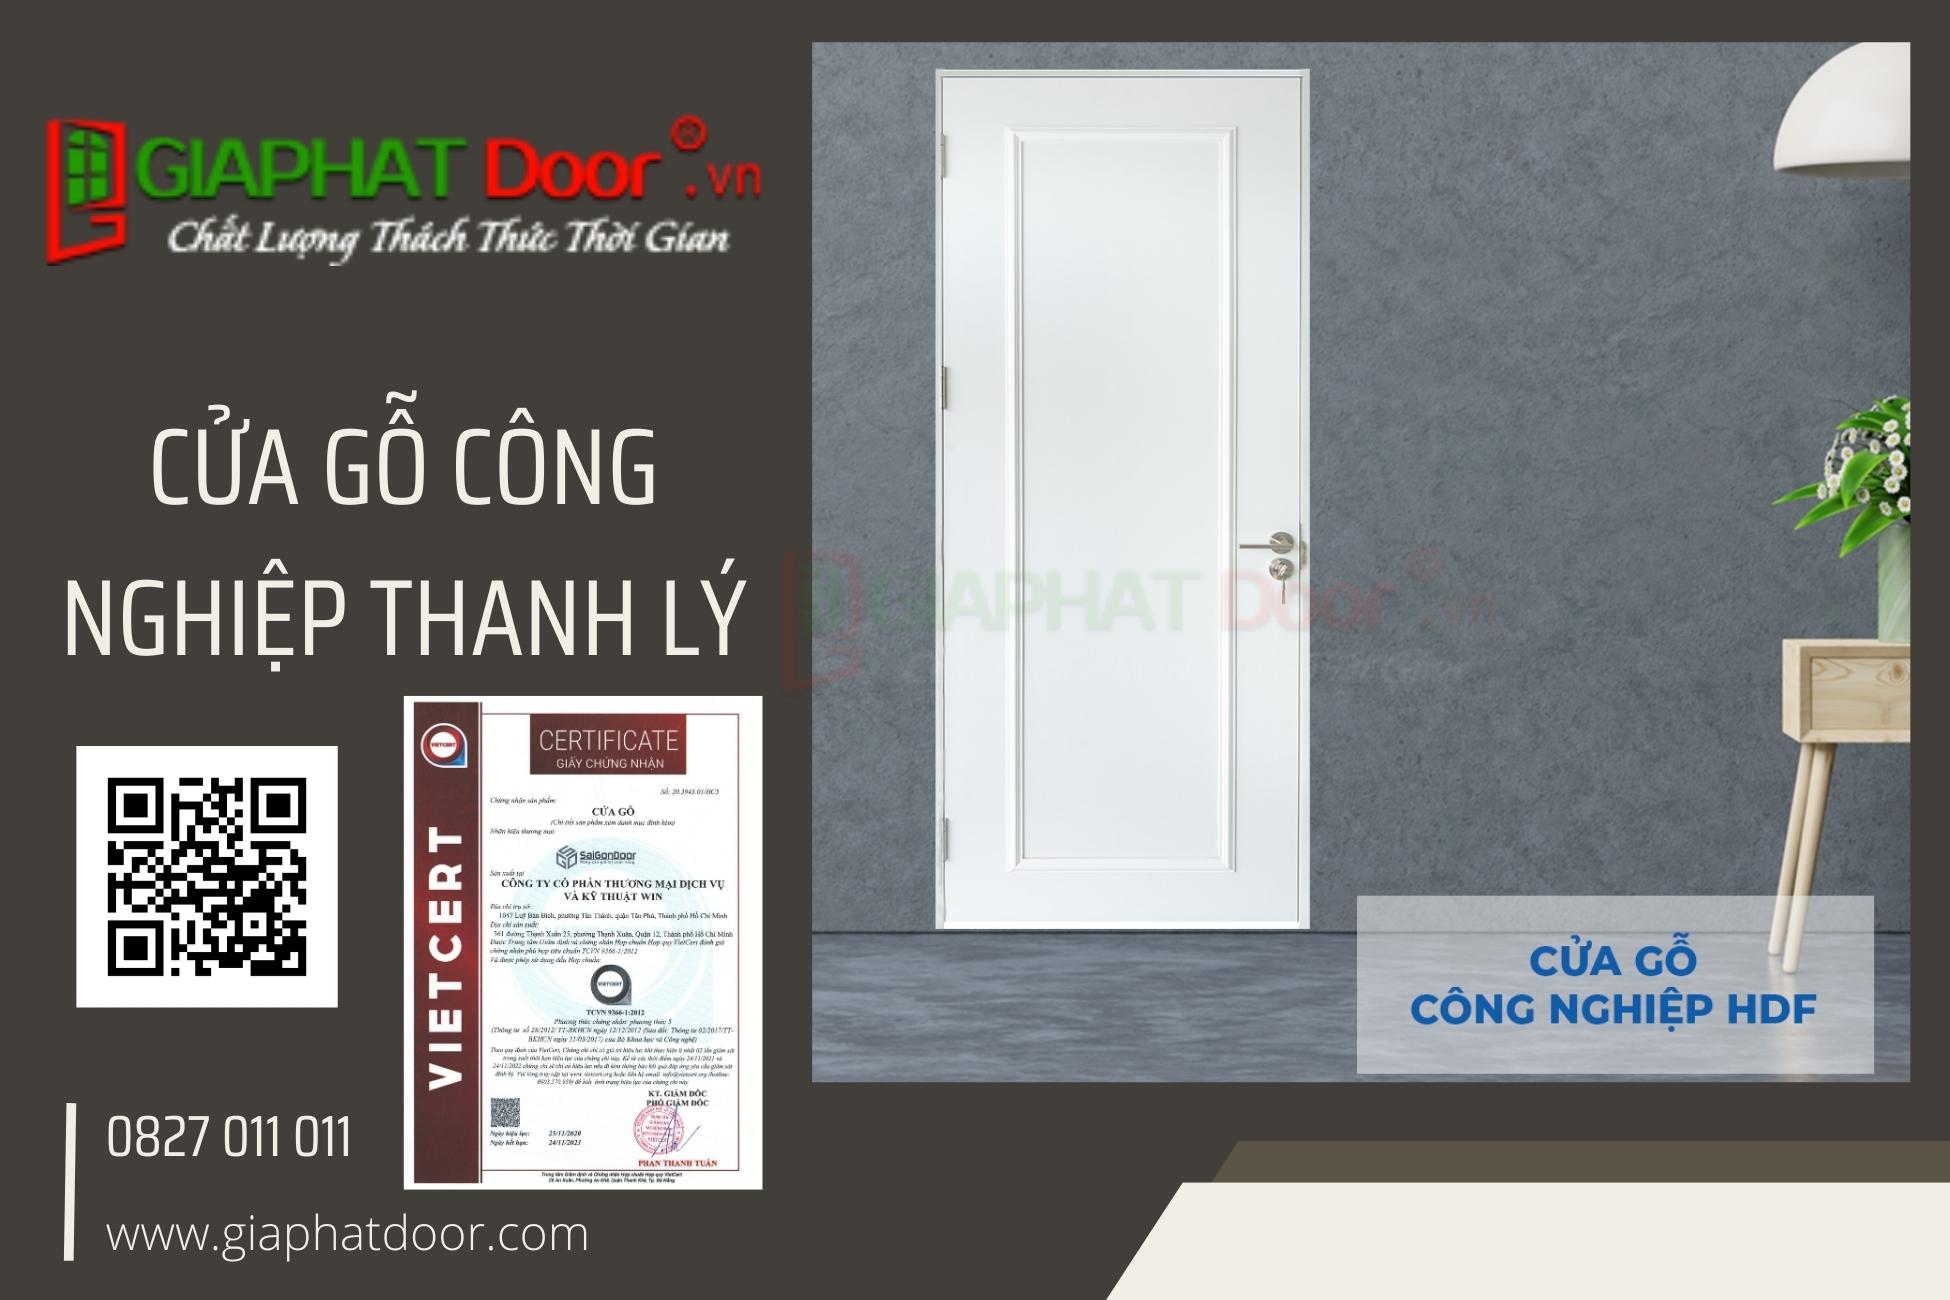 cua-go-cong-nghiep-thanh-ly3